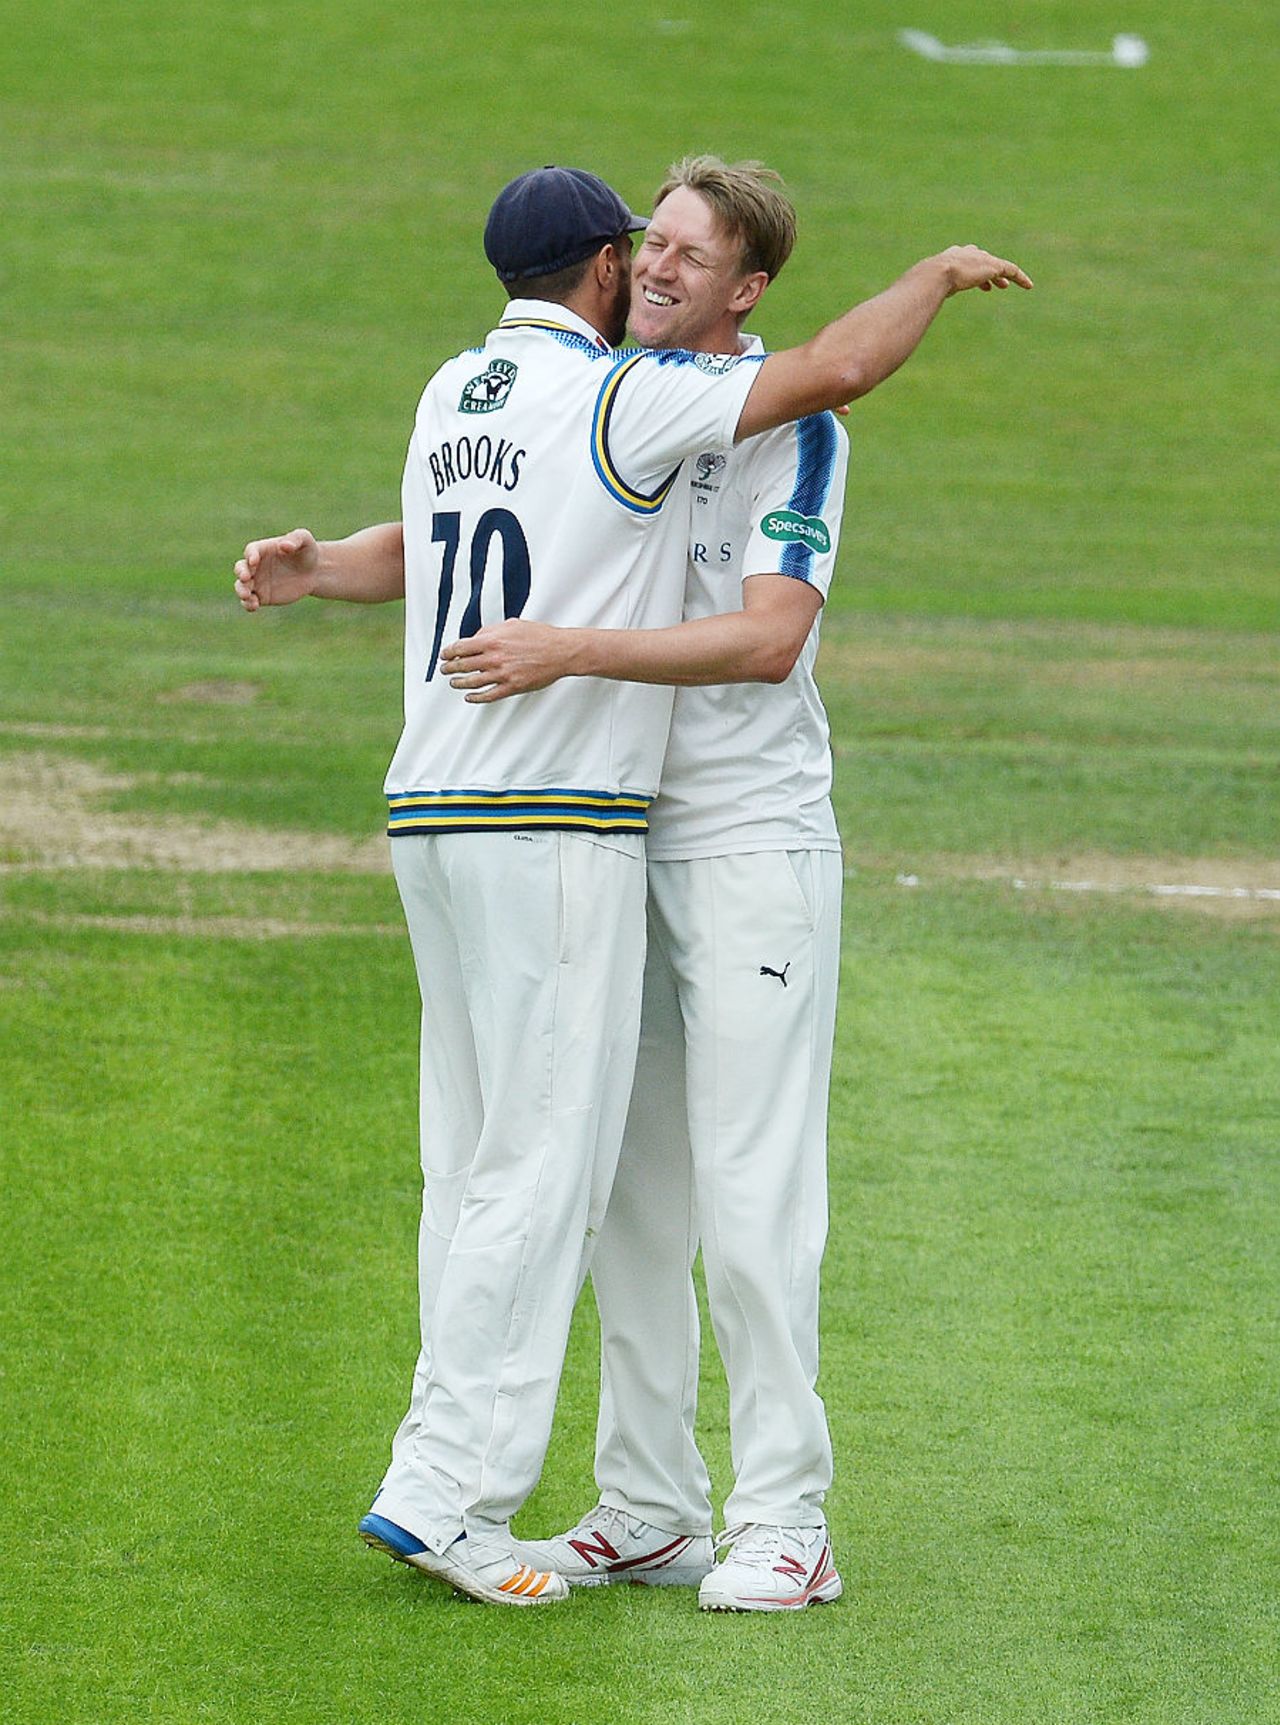 Steve Patterson celebrates the wicket of Scott Borthwick, Yorkshire v Surrey, Specsavers County Championship Division One, Headingley, 1st day, June 26, 2017